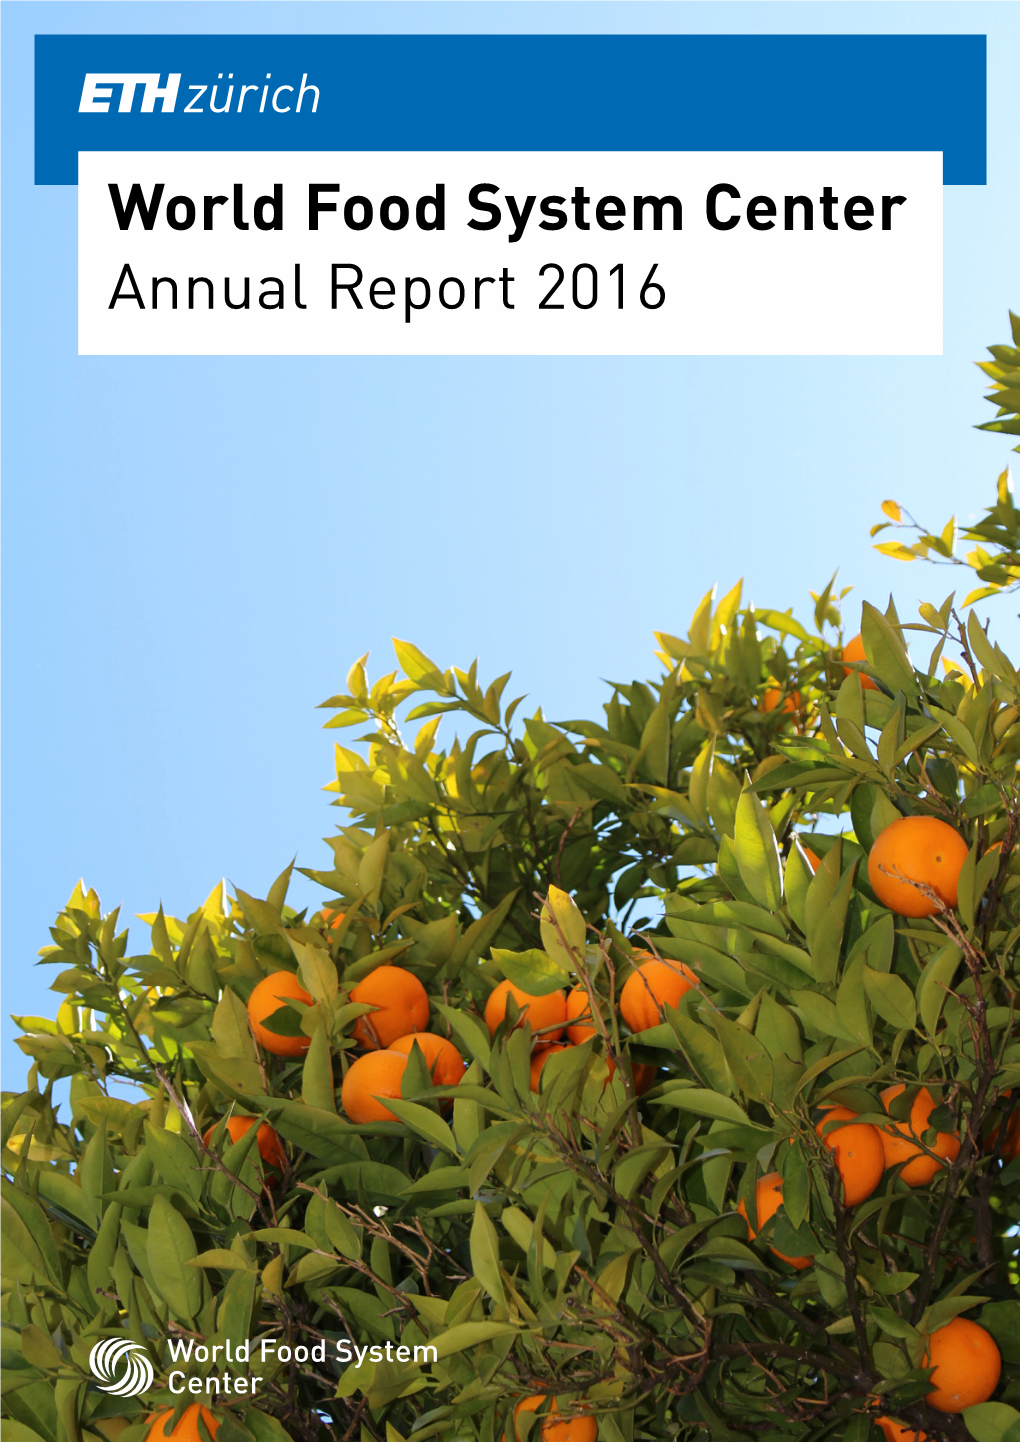 World Food System Center Annual Report 2016